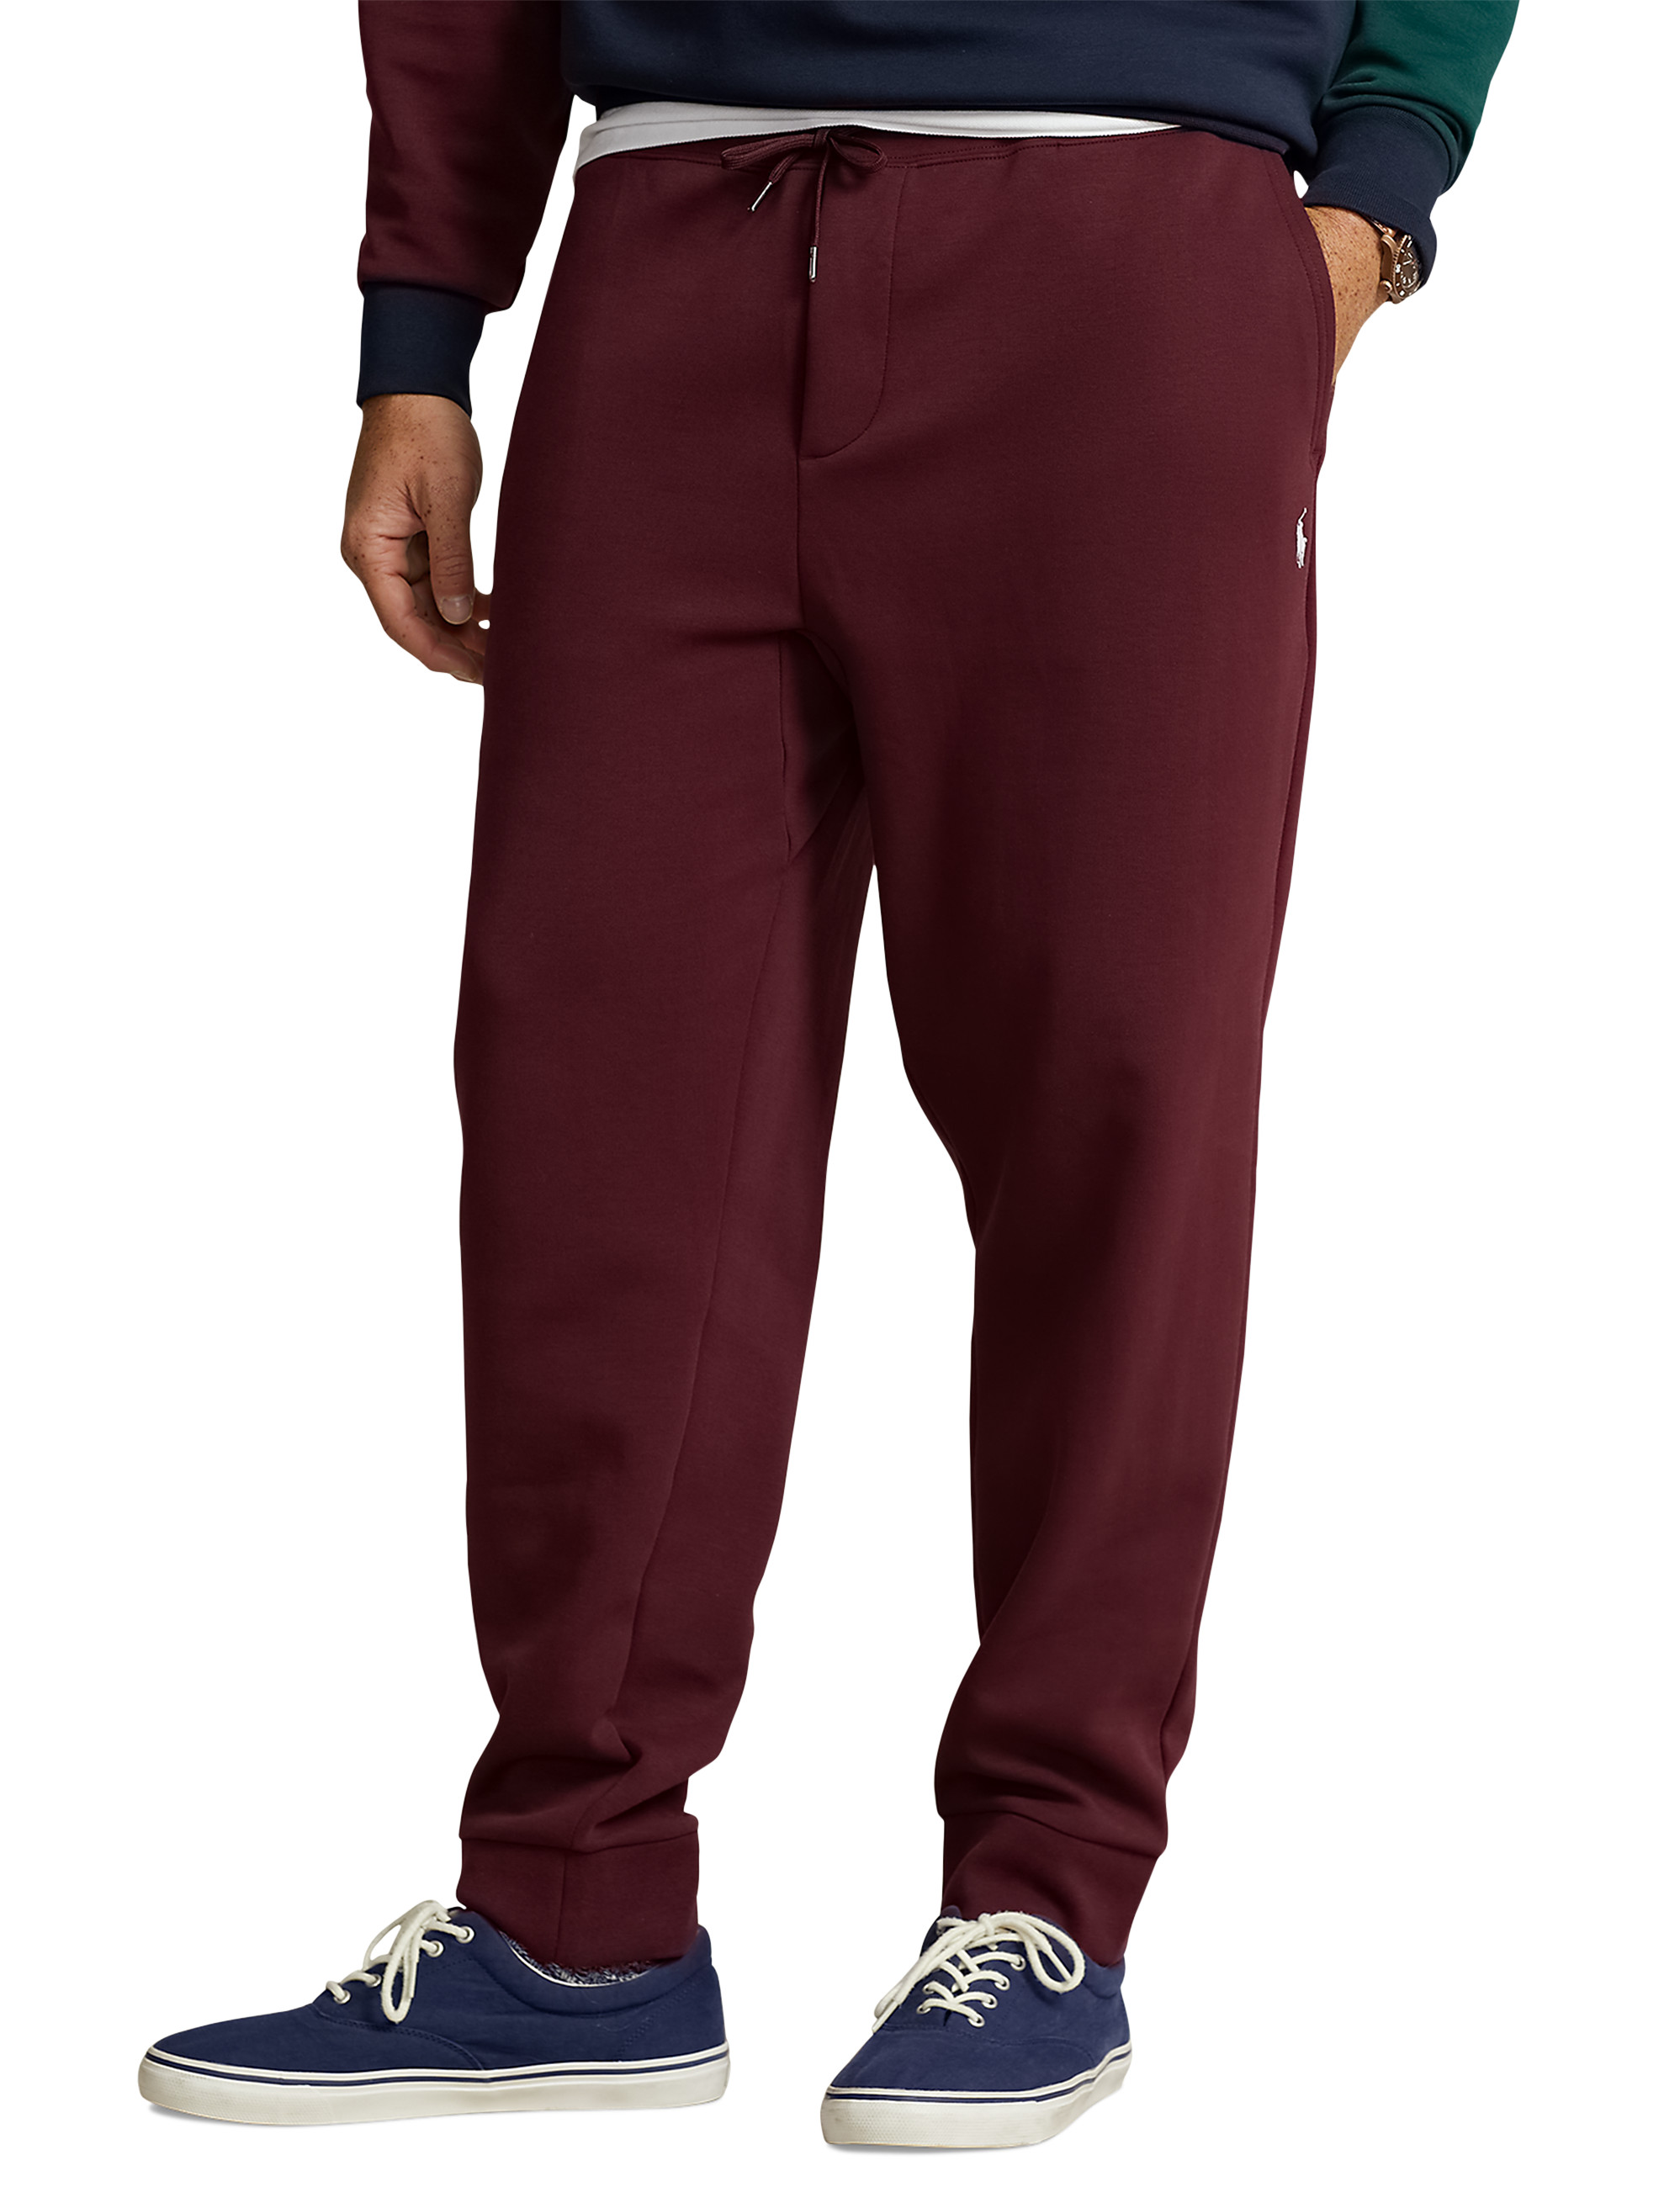  Champion Sweatpants Men's Big and Tall Heavyweight Fleece  Joggers Black : Clothing, Shoes & Jewelry